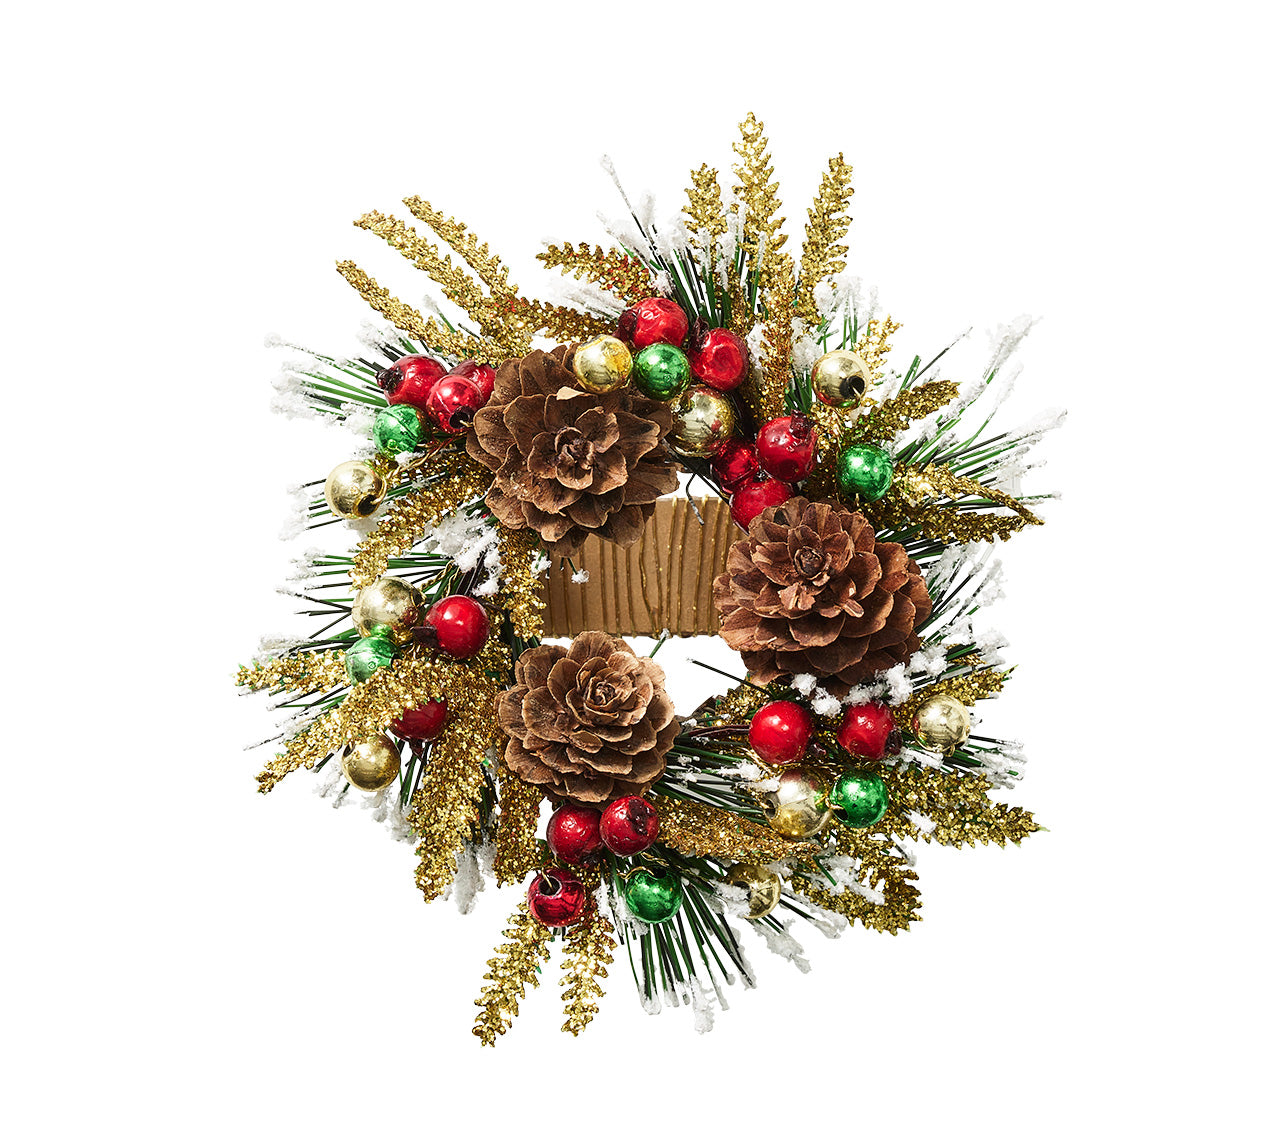 Winter Wreath Napkin Ring in Red, Green & Gold, Set of 4